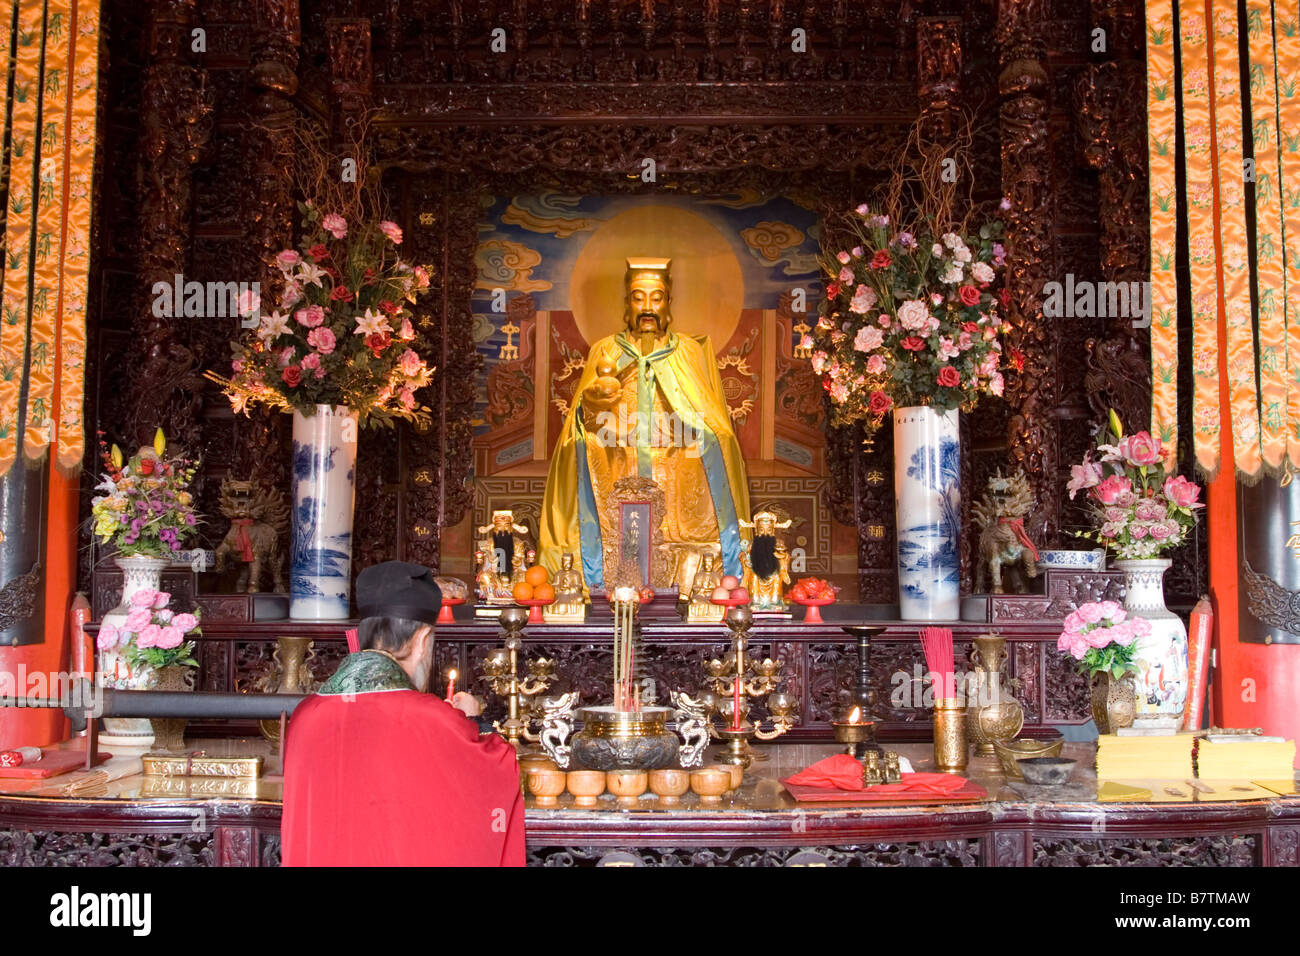 Tao monk lights candles at the shrine of the god called Xian Zu Dian at Ming Sheng Gung Tao temple in Xian in China. Stock Photo